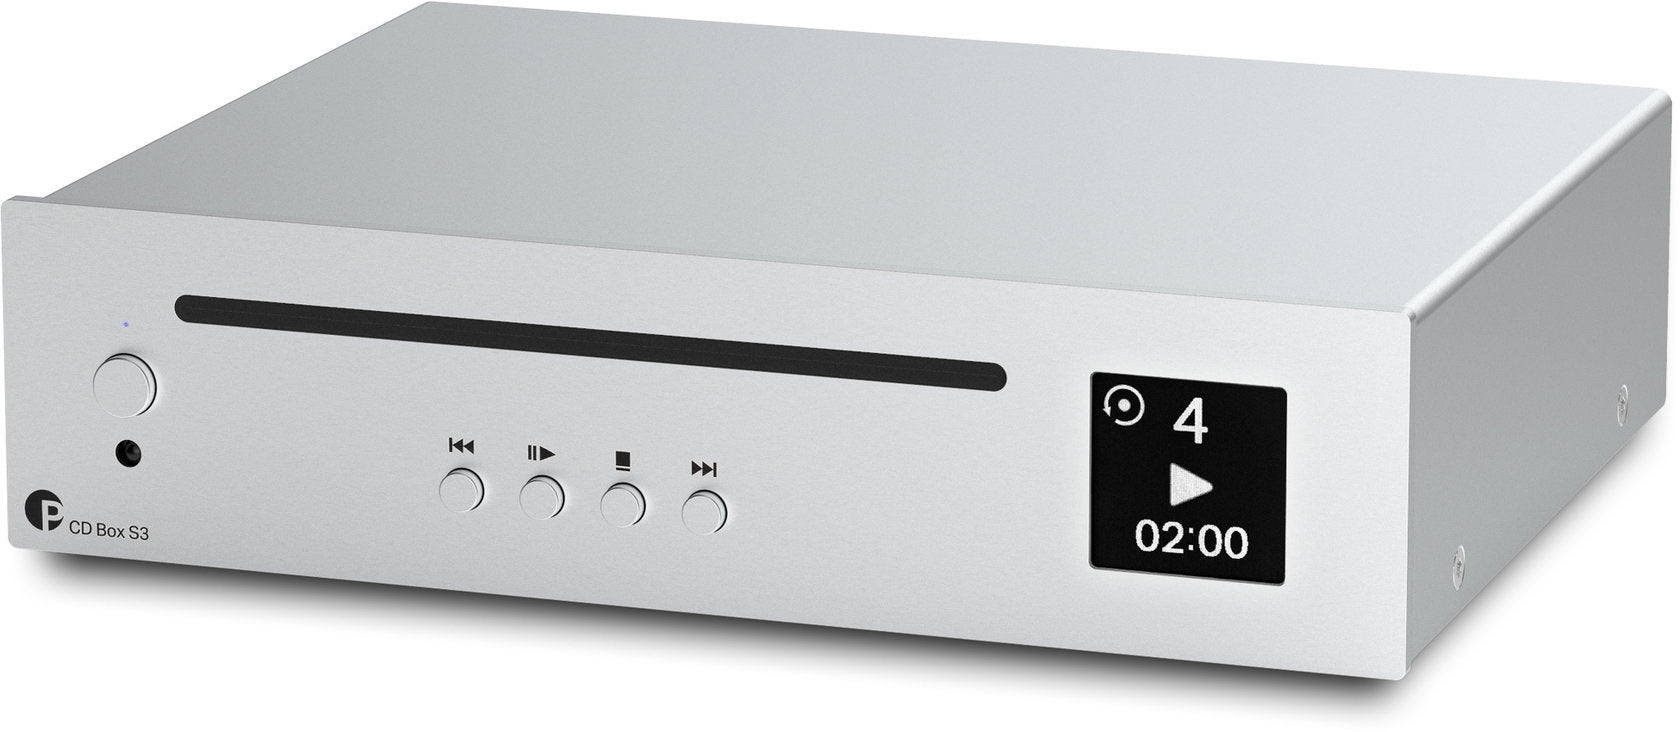 Pro-Ject CD Box S3 CD player